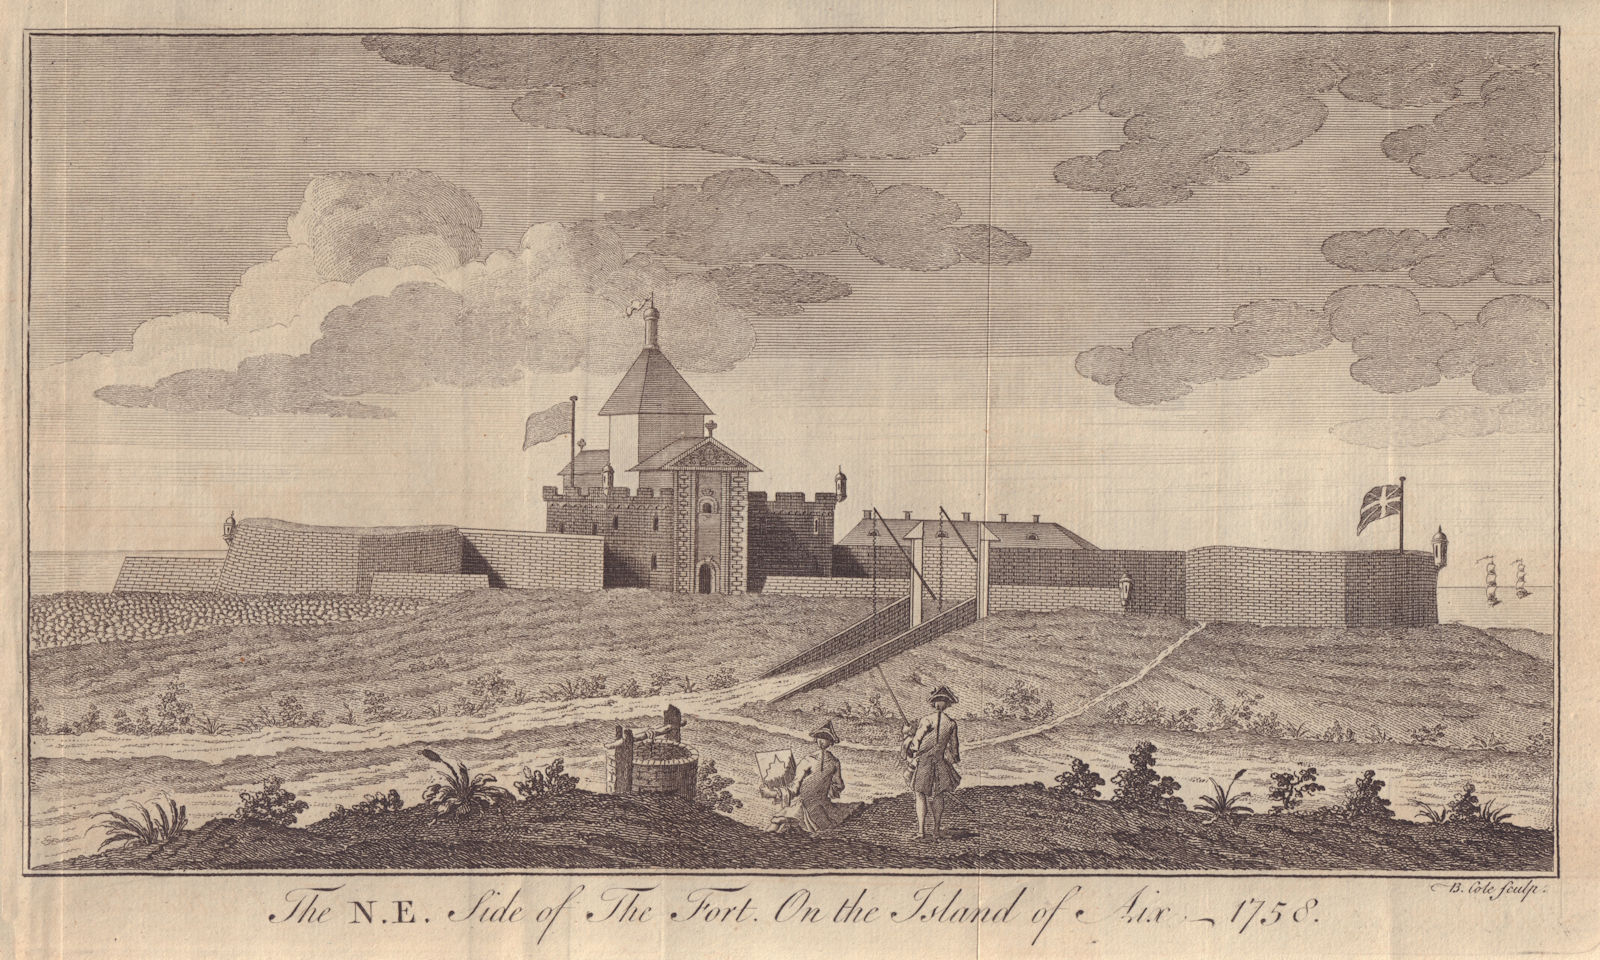 The N.E. side of the Fort on the Island of Aix. Île-d'Aix Charente-Maritime 1758